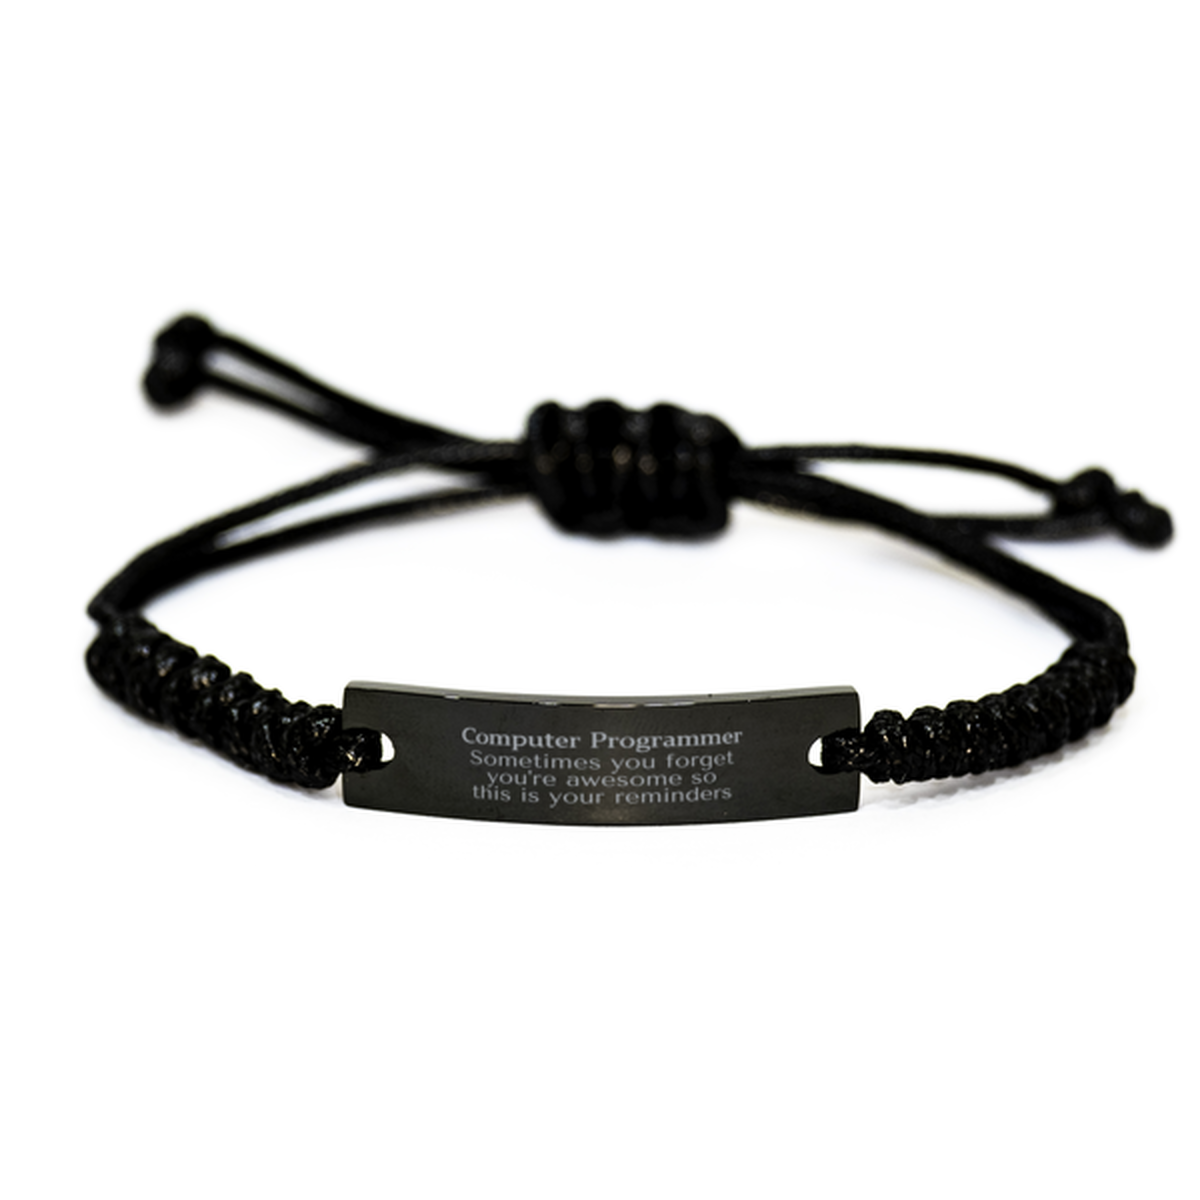 Sentimental Computer Programmer Black Rope Bracelet, Computer Programmer Sometimes you forget you're awesome so this is your reminders, Graduation Christmas Birthday Gifts for Computer Programmer, Men, Women, Coworkers